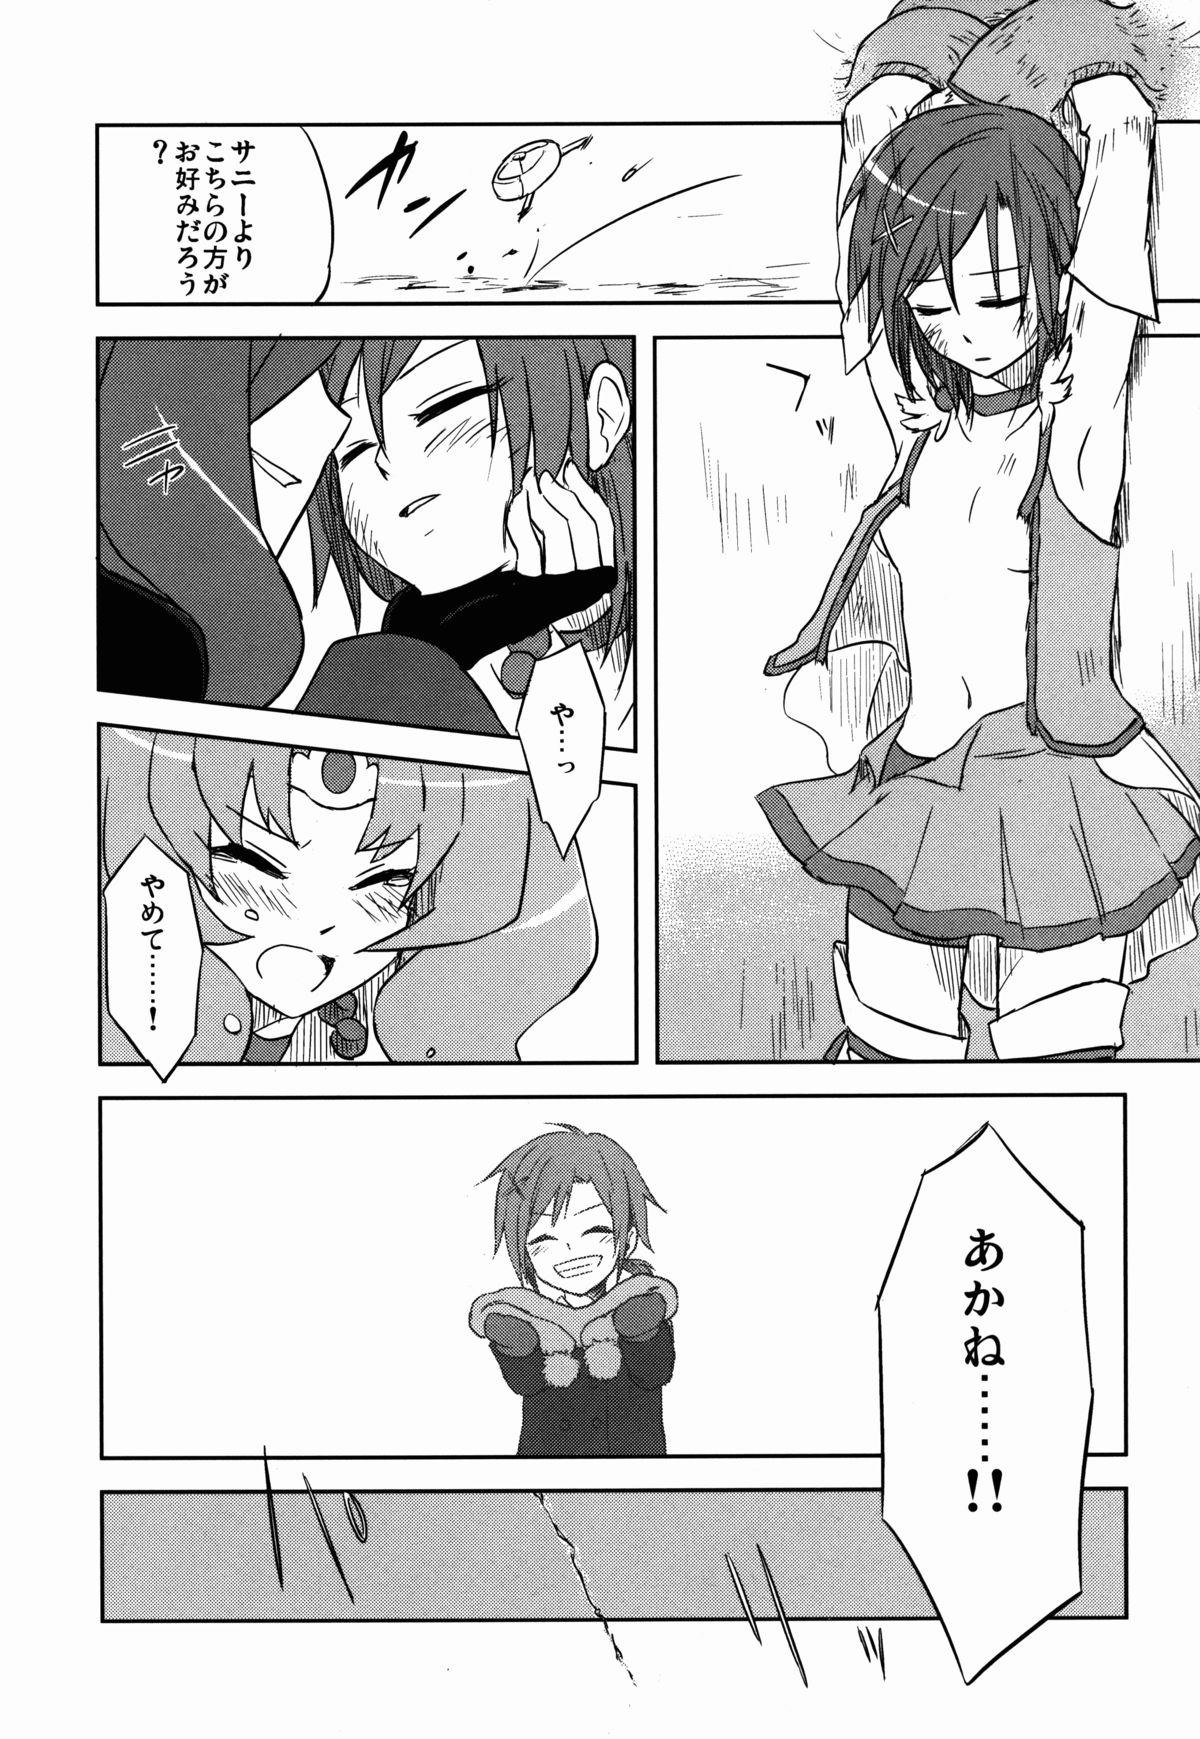 [GY60 (Gya)] BE::MS (Smile Precure!) [2013-02-17] page 10 full